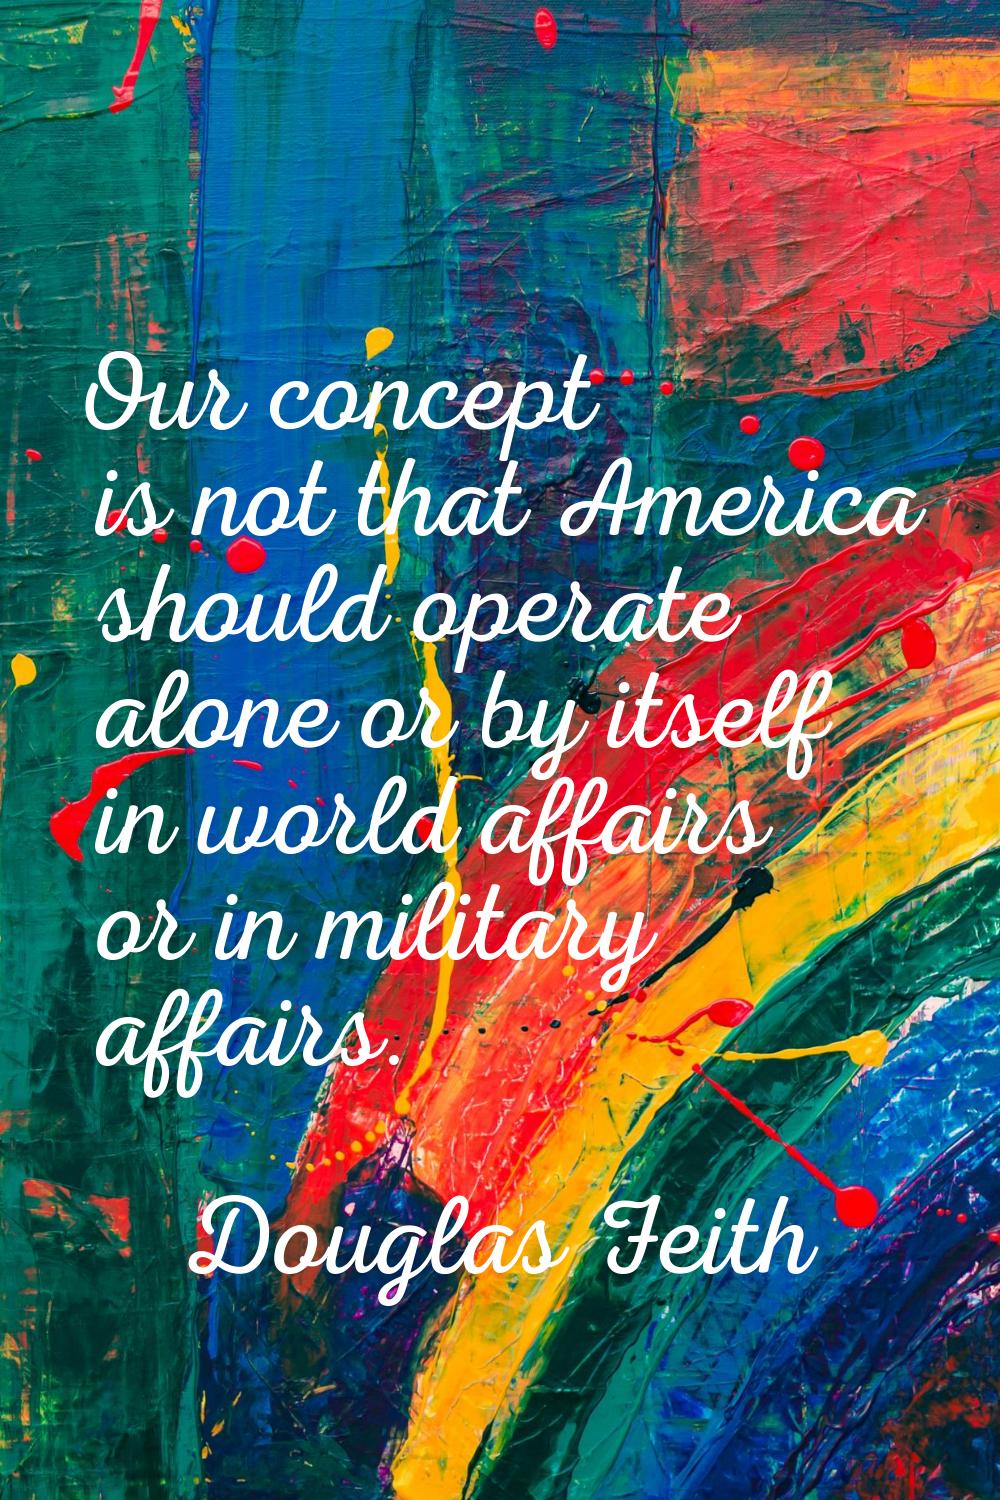 Our concept is not that America should operate alone or by itself in world affairs or in military a